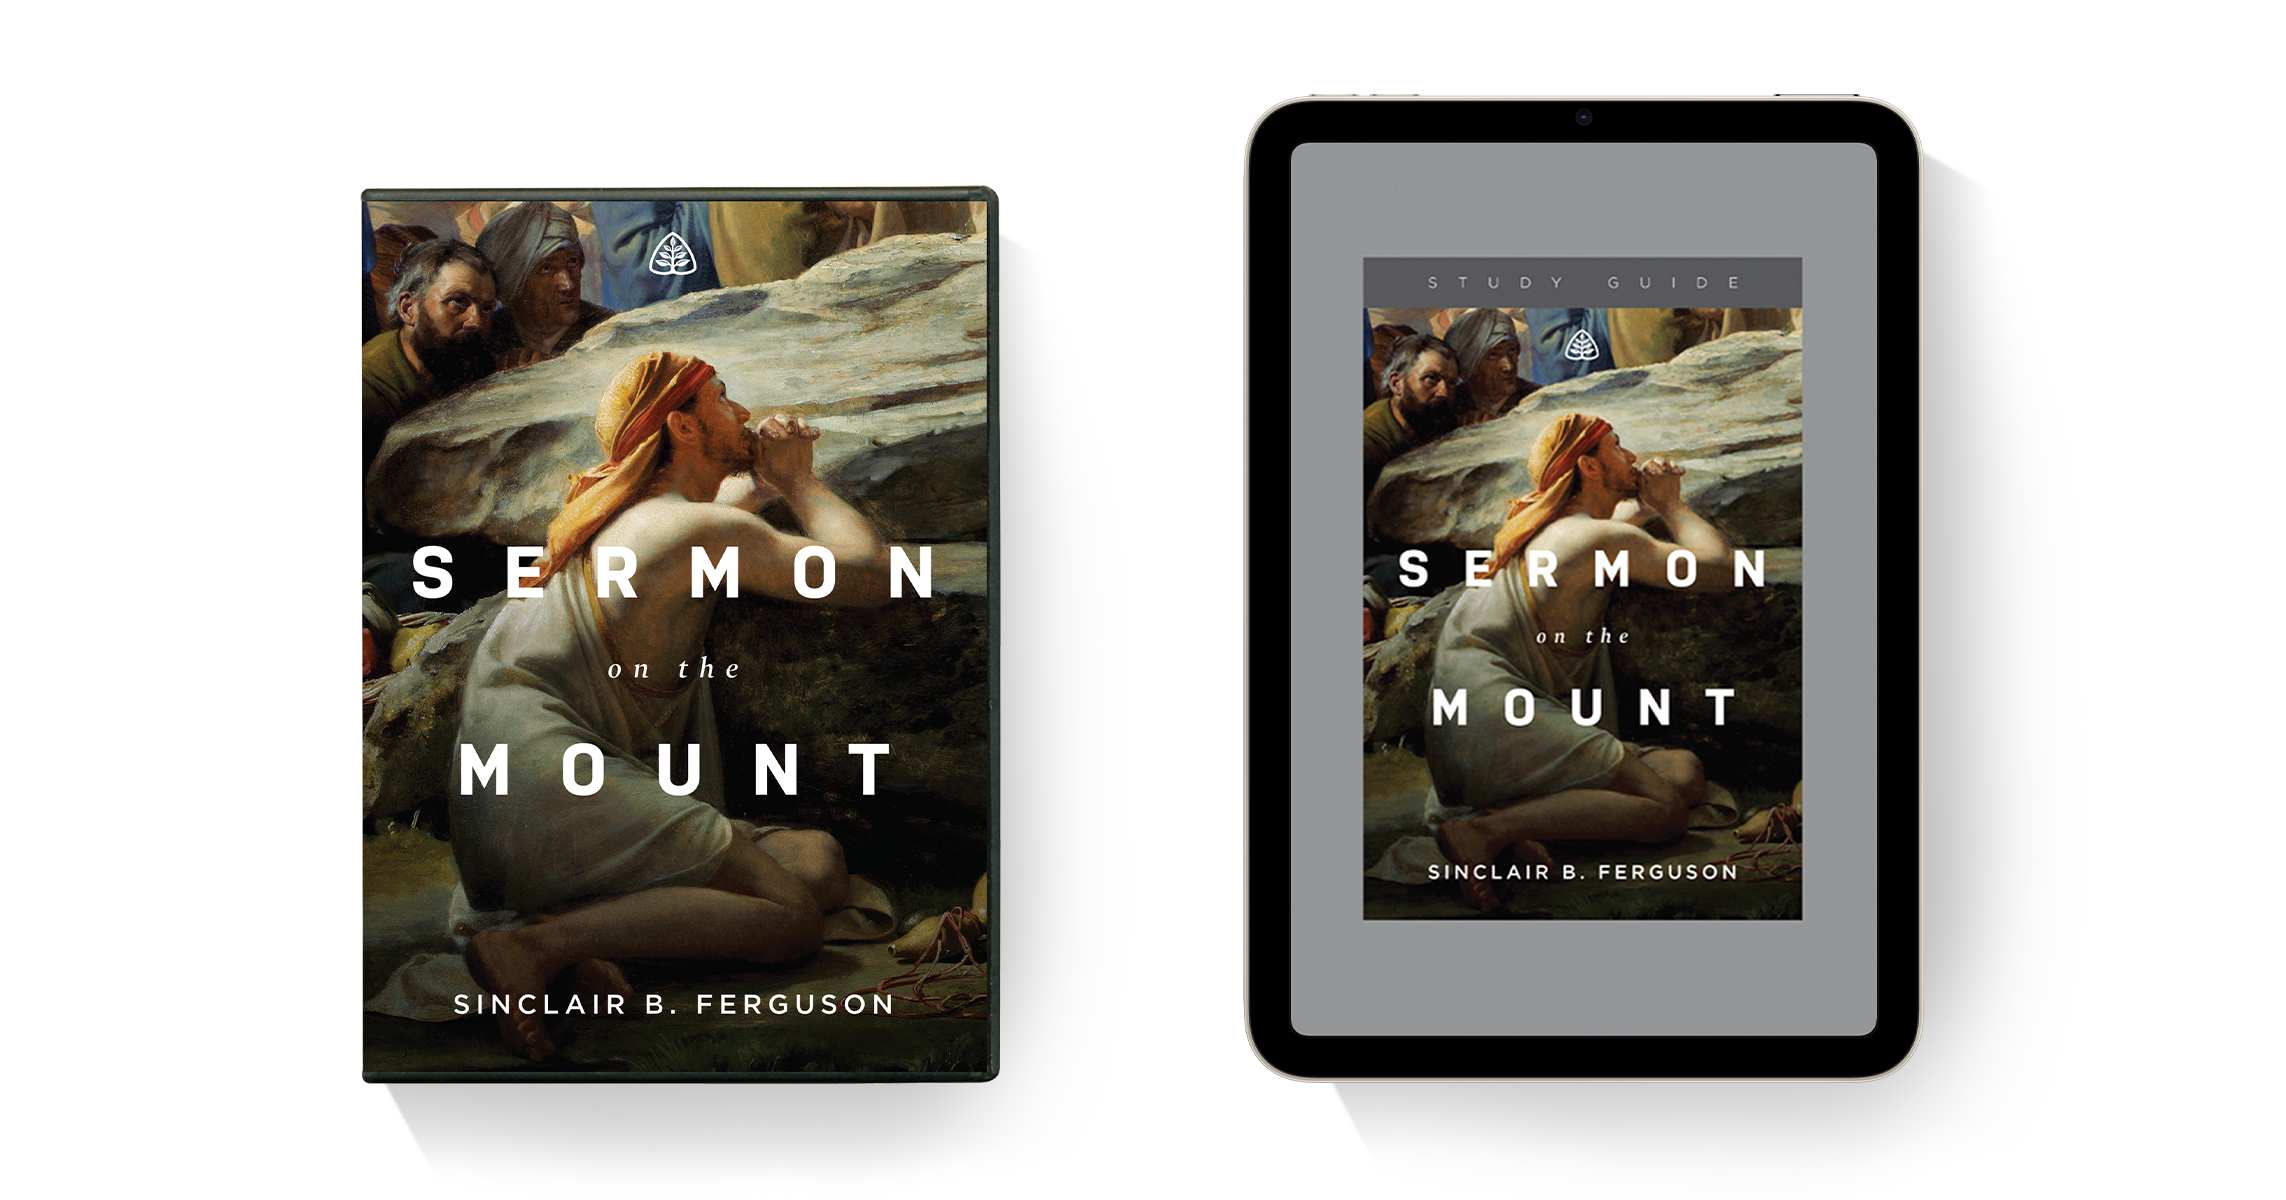 Get the ‘Sermon on the Mount’ DVD Teaching Series and Digital Study ...